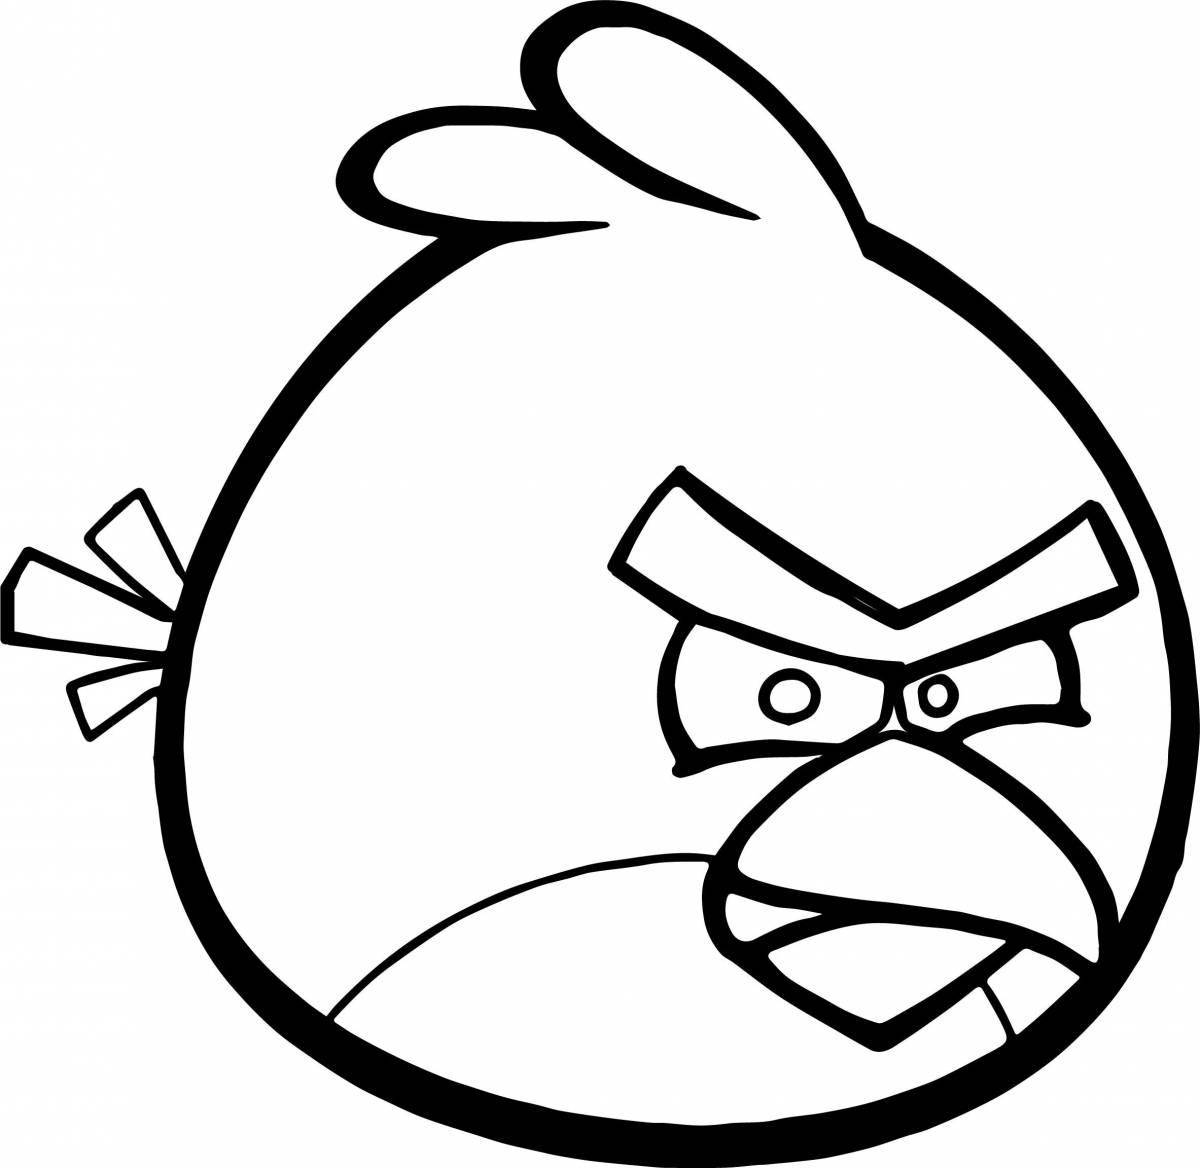 Angry birds seasons funny coloring book